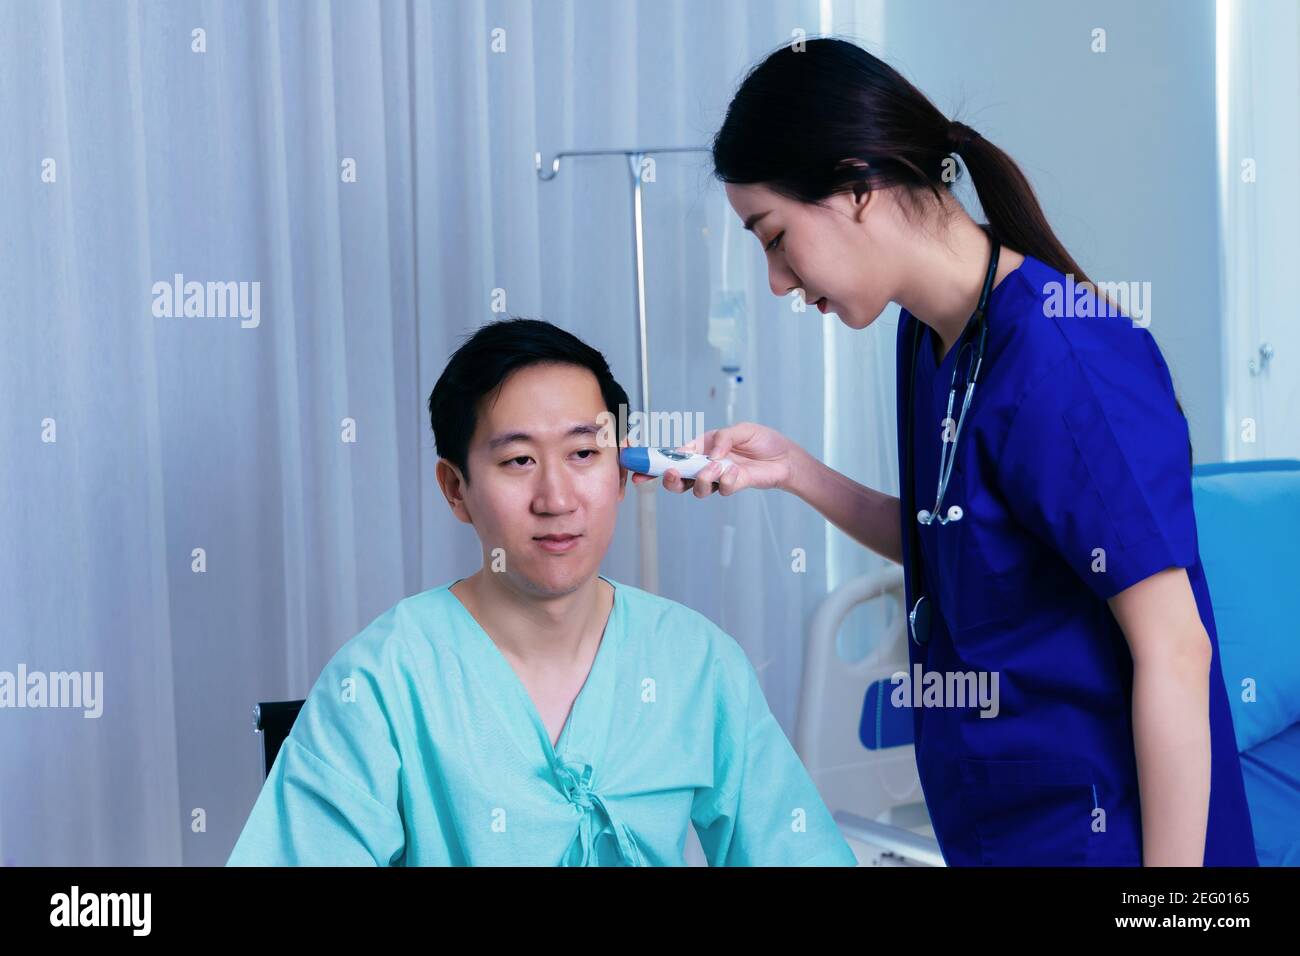 Young female medical worker with stethoscope examining ears of Asian male patient in uniform using tympanic thermometer for temperature in hospital Stock Photo